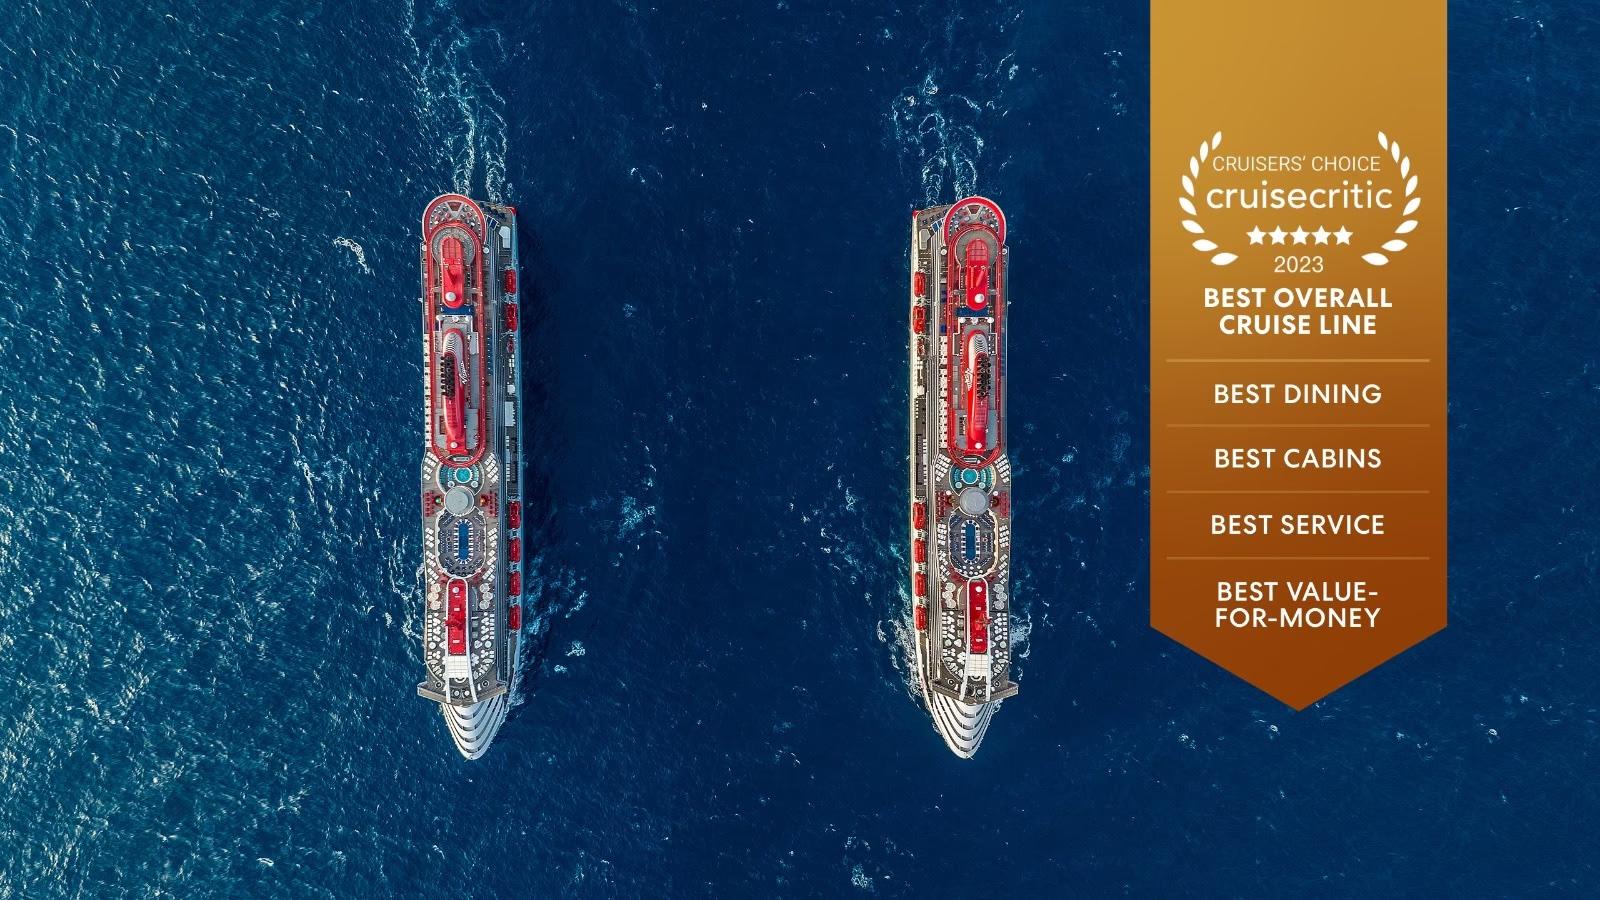 Virgin Voyages Sweeps Large Ship Cruise Critic Cruiser's Choice Awards 2023 - background banner